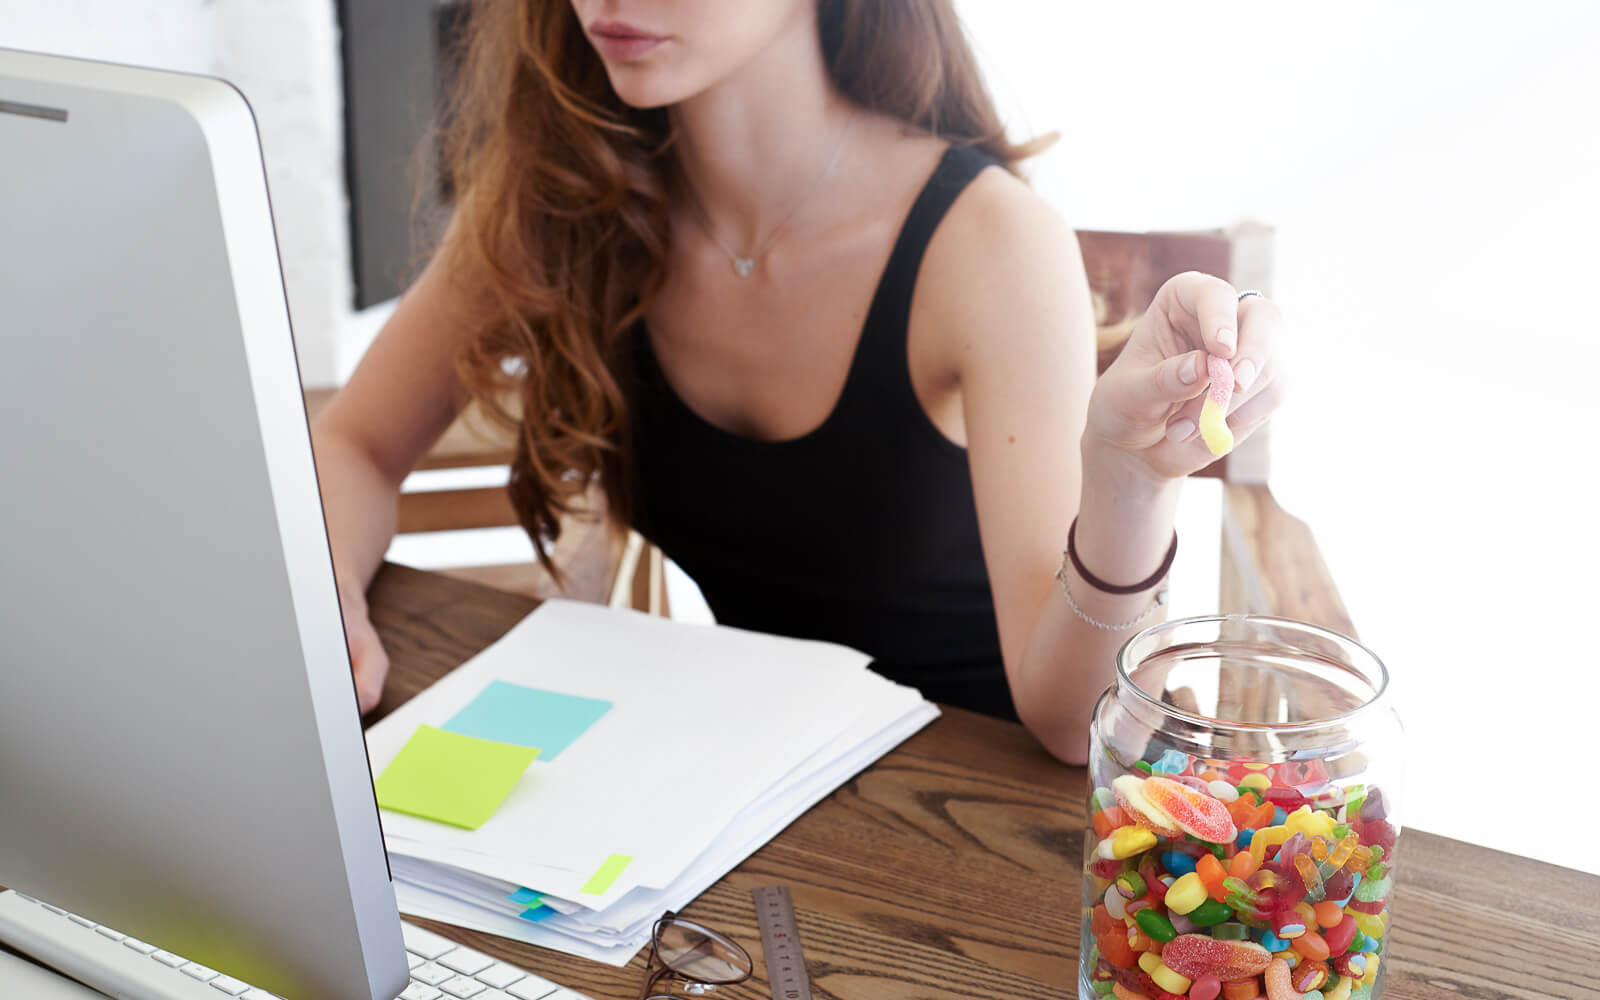 Mindful eating discourages eating while working on your computer or watching TV.